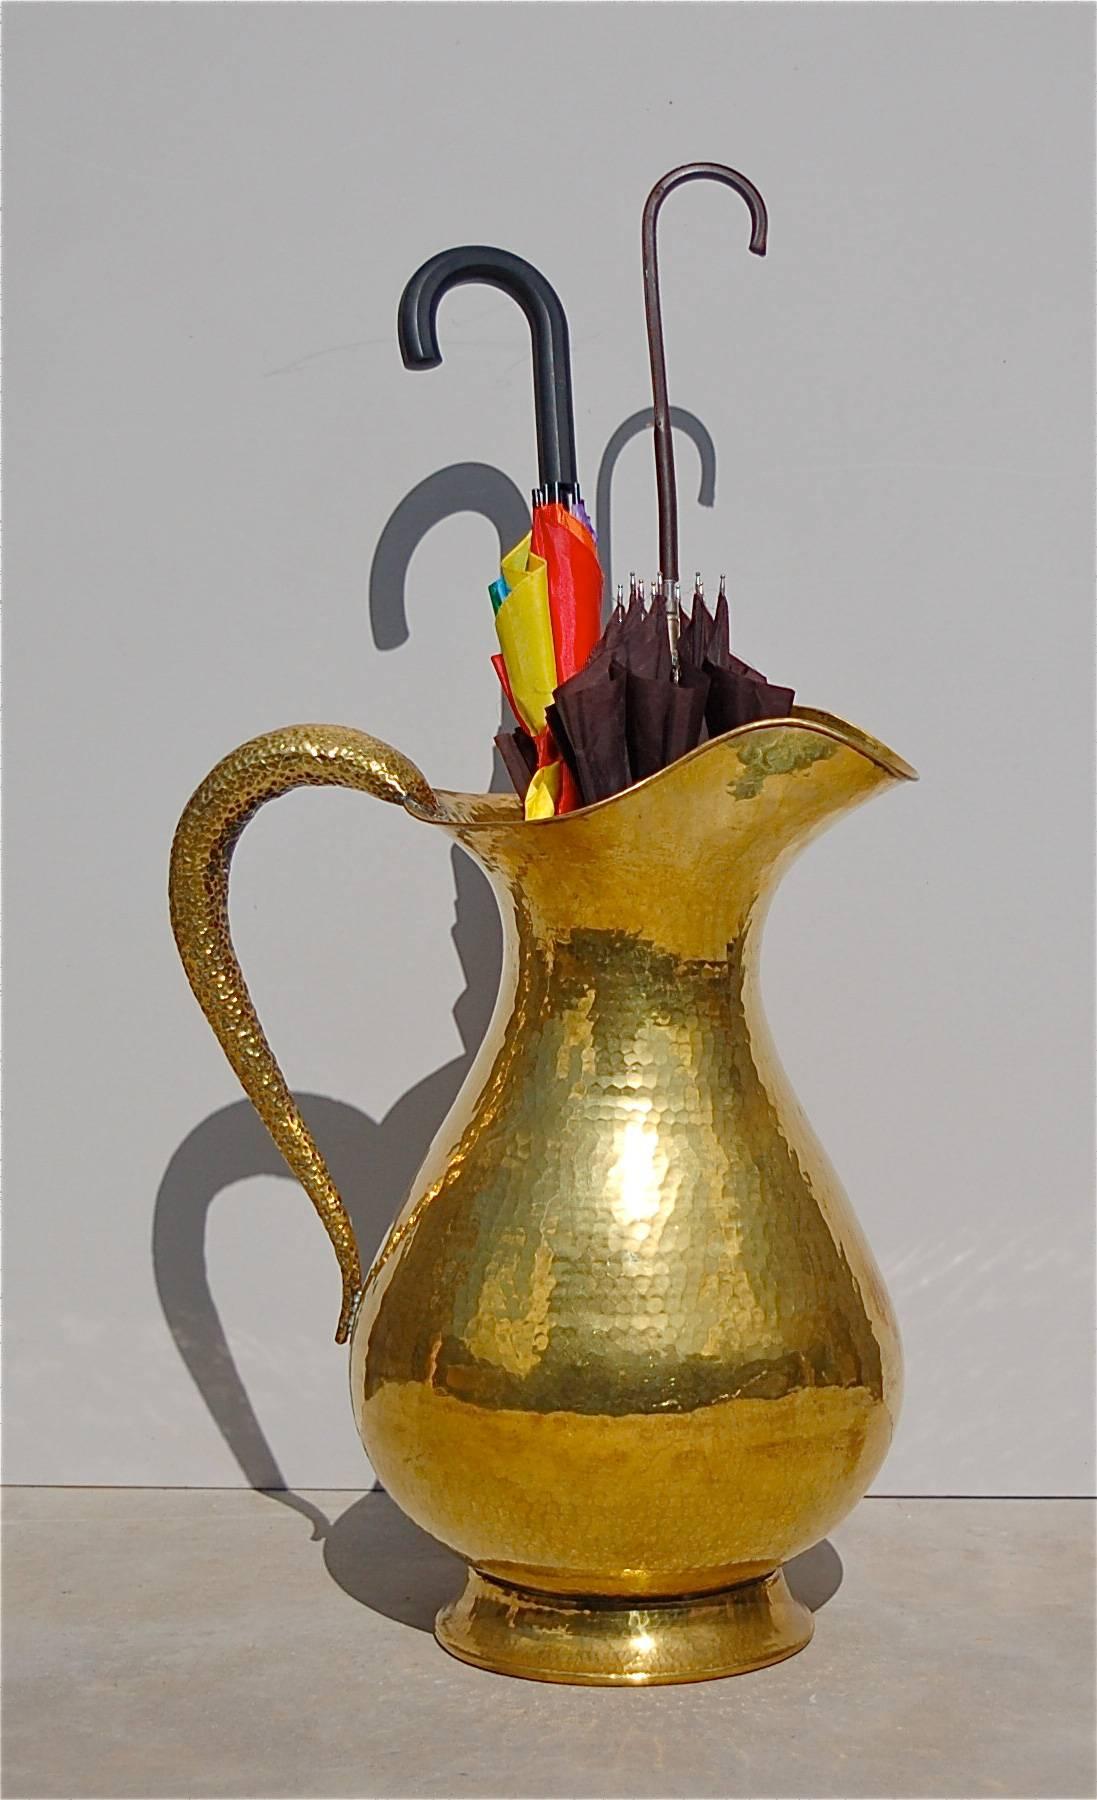 Country Oversized Hammered Brass Vase or Umbrella Stand in Shape of Jug, Italy, 1950s For Sale